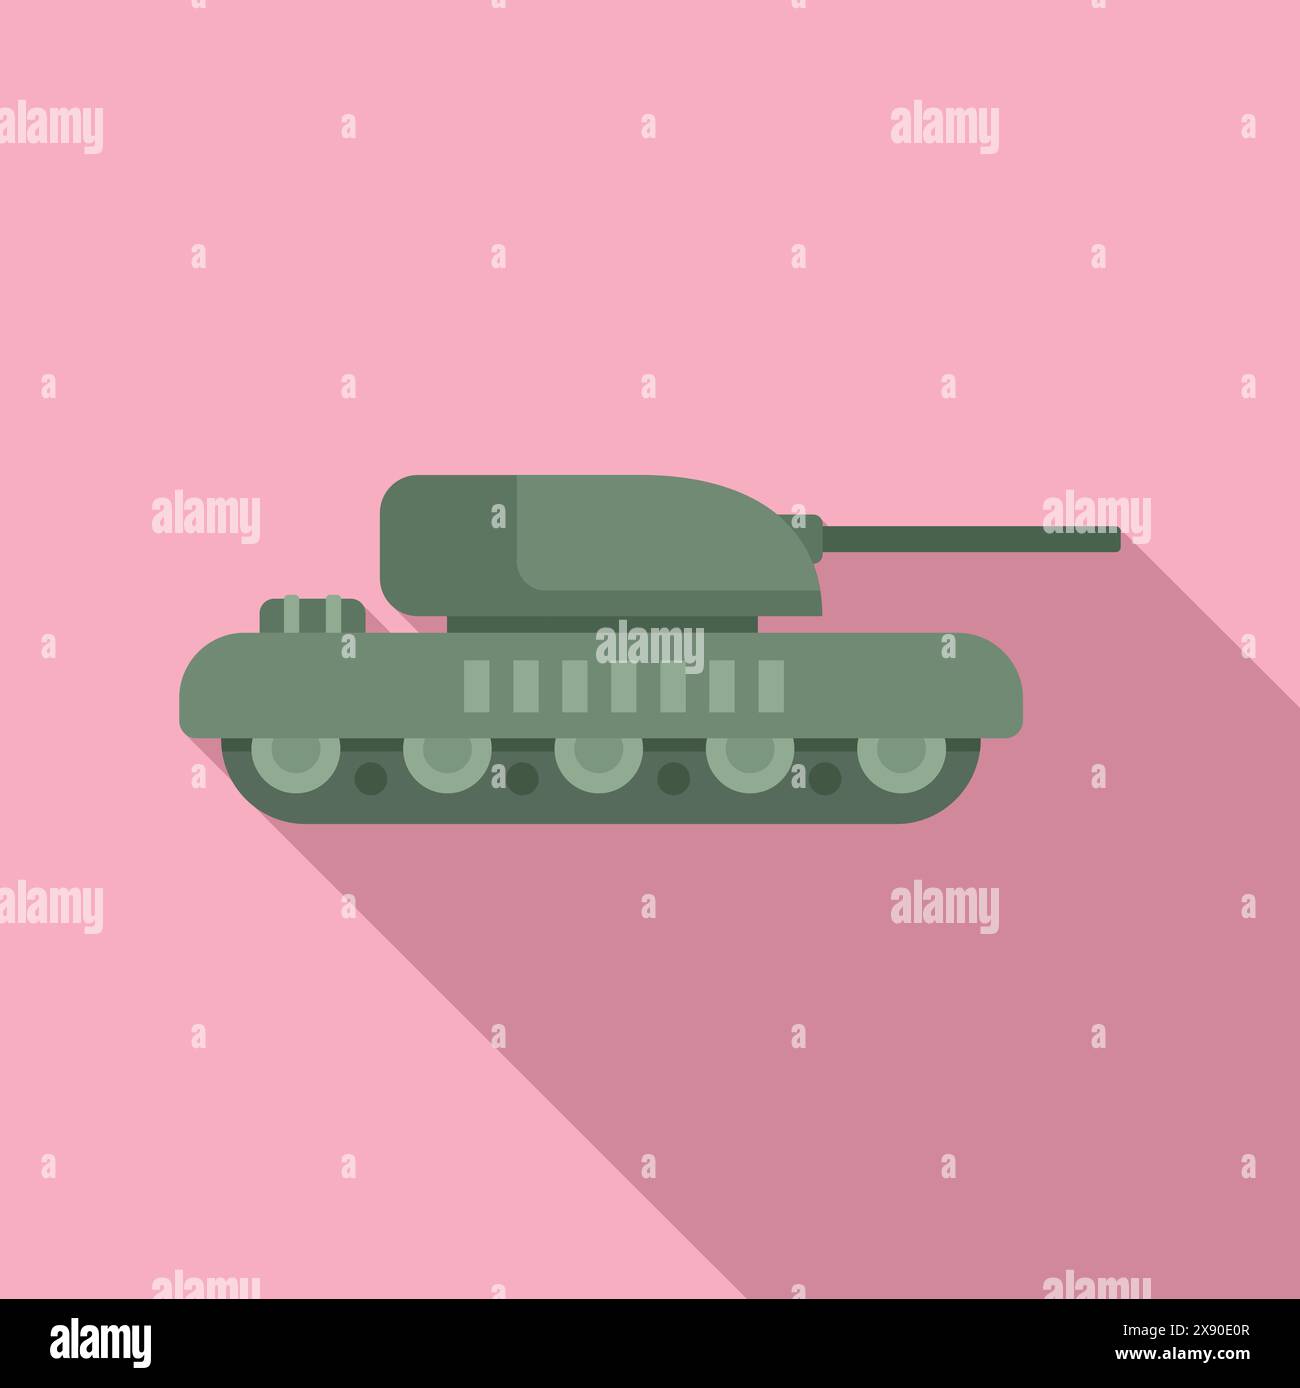 Simple, flat design of a green military tank icon on a pink background, suitable for web and print Stock Vector